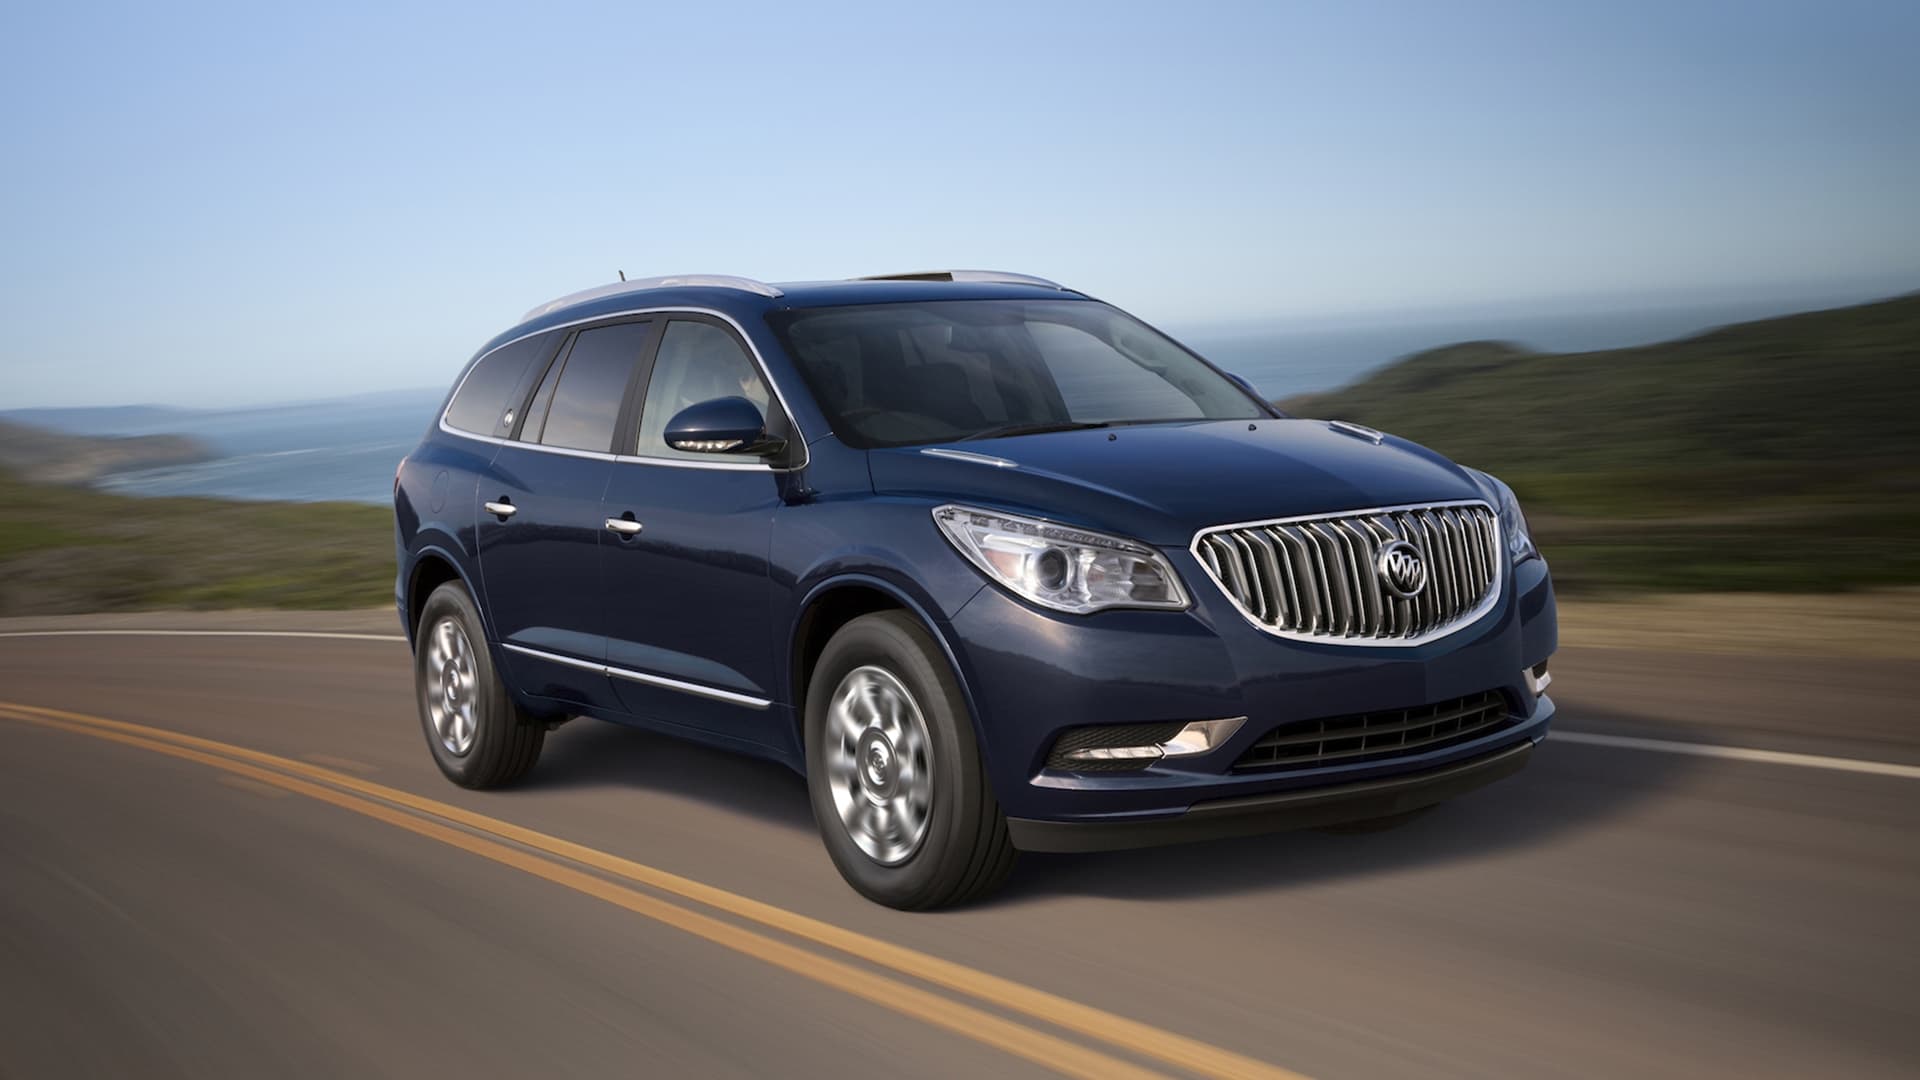 Buick Enclave wallpaper High Quality Resolution Download